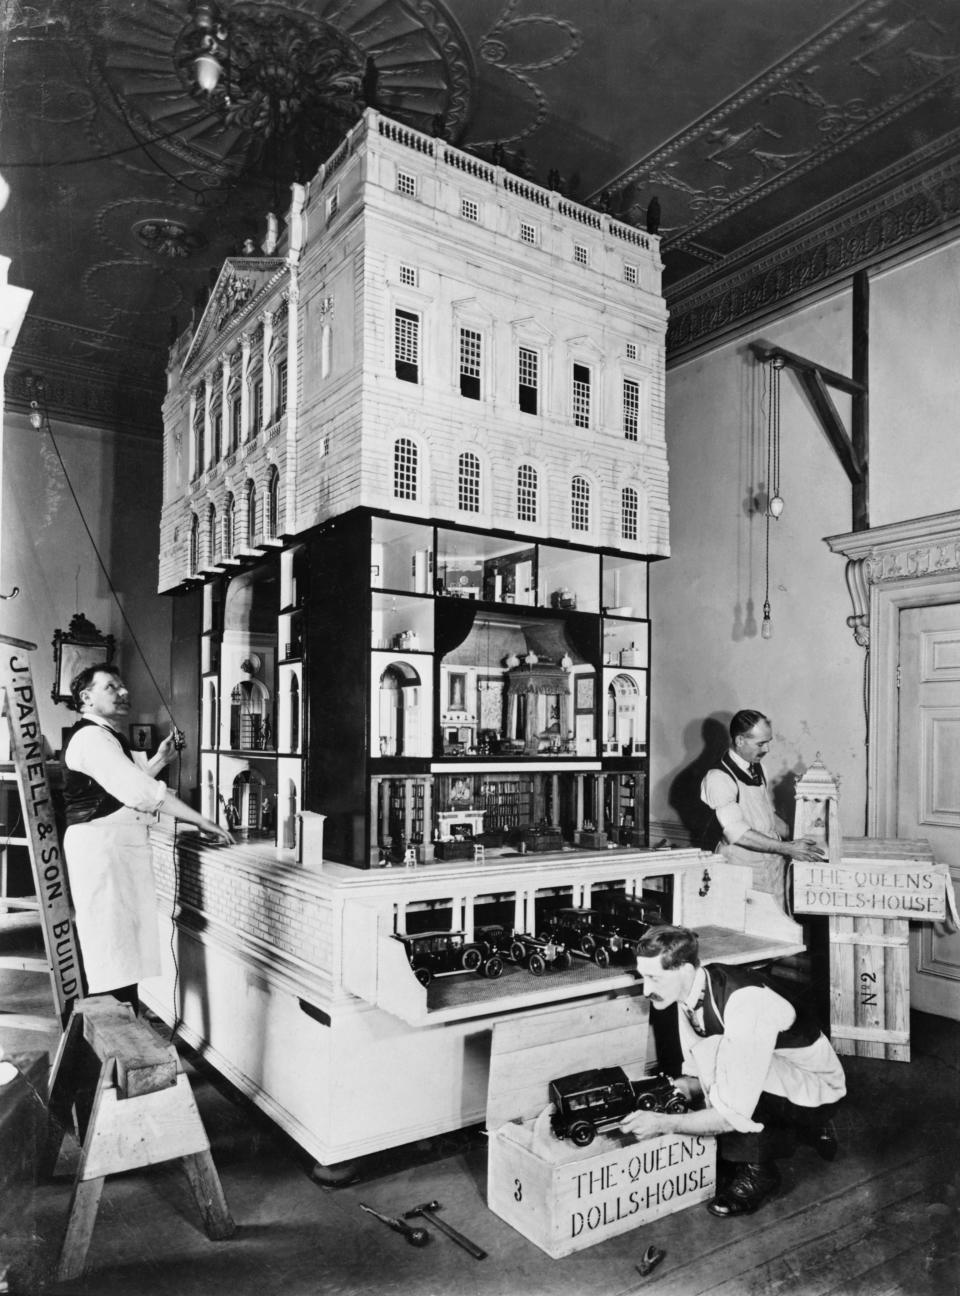 The exterior of Queen Mary’s dollhouse